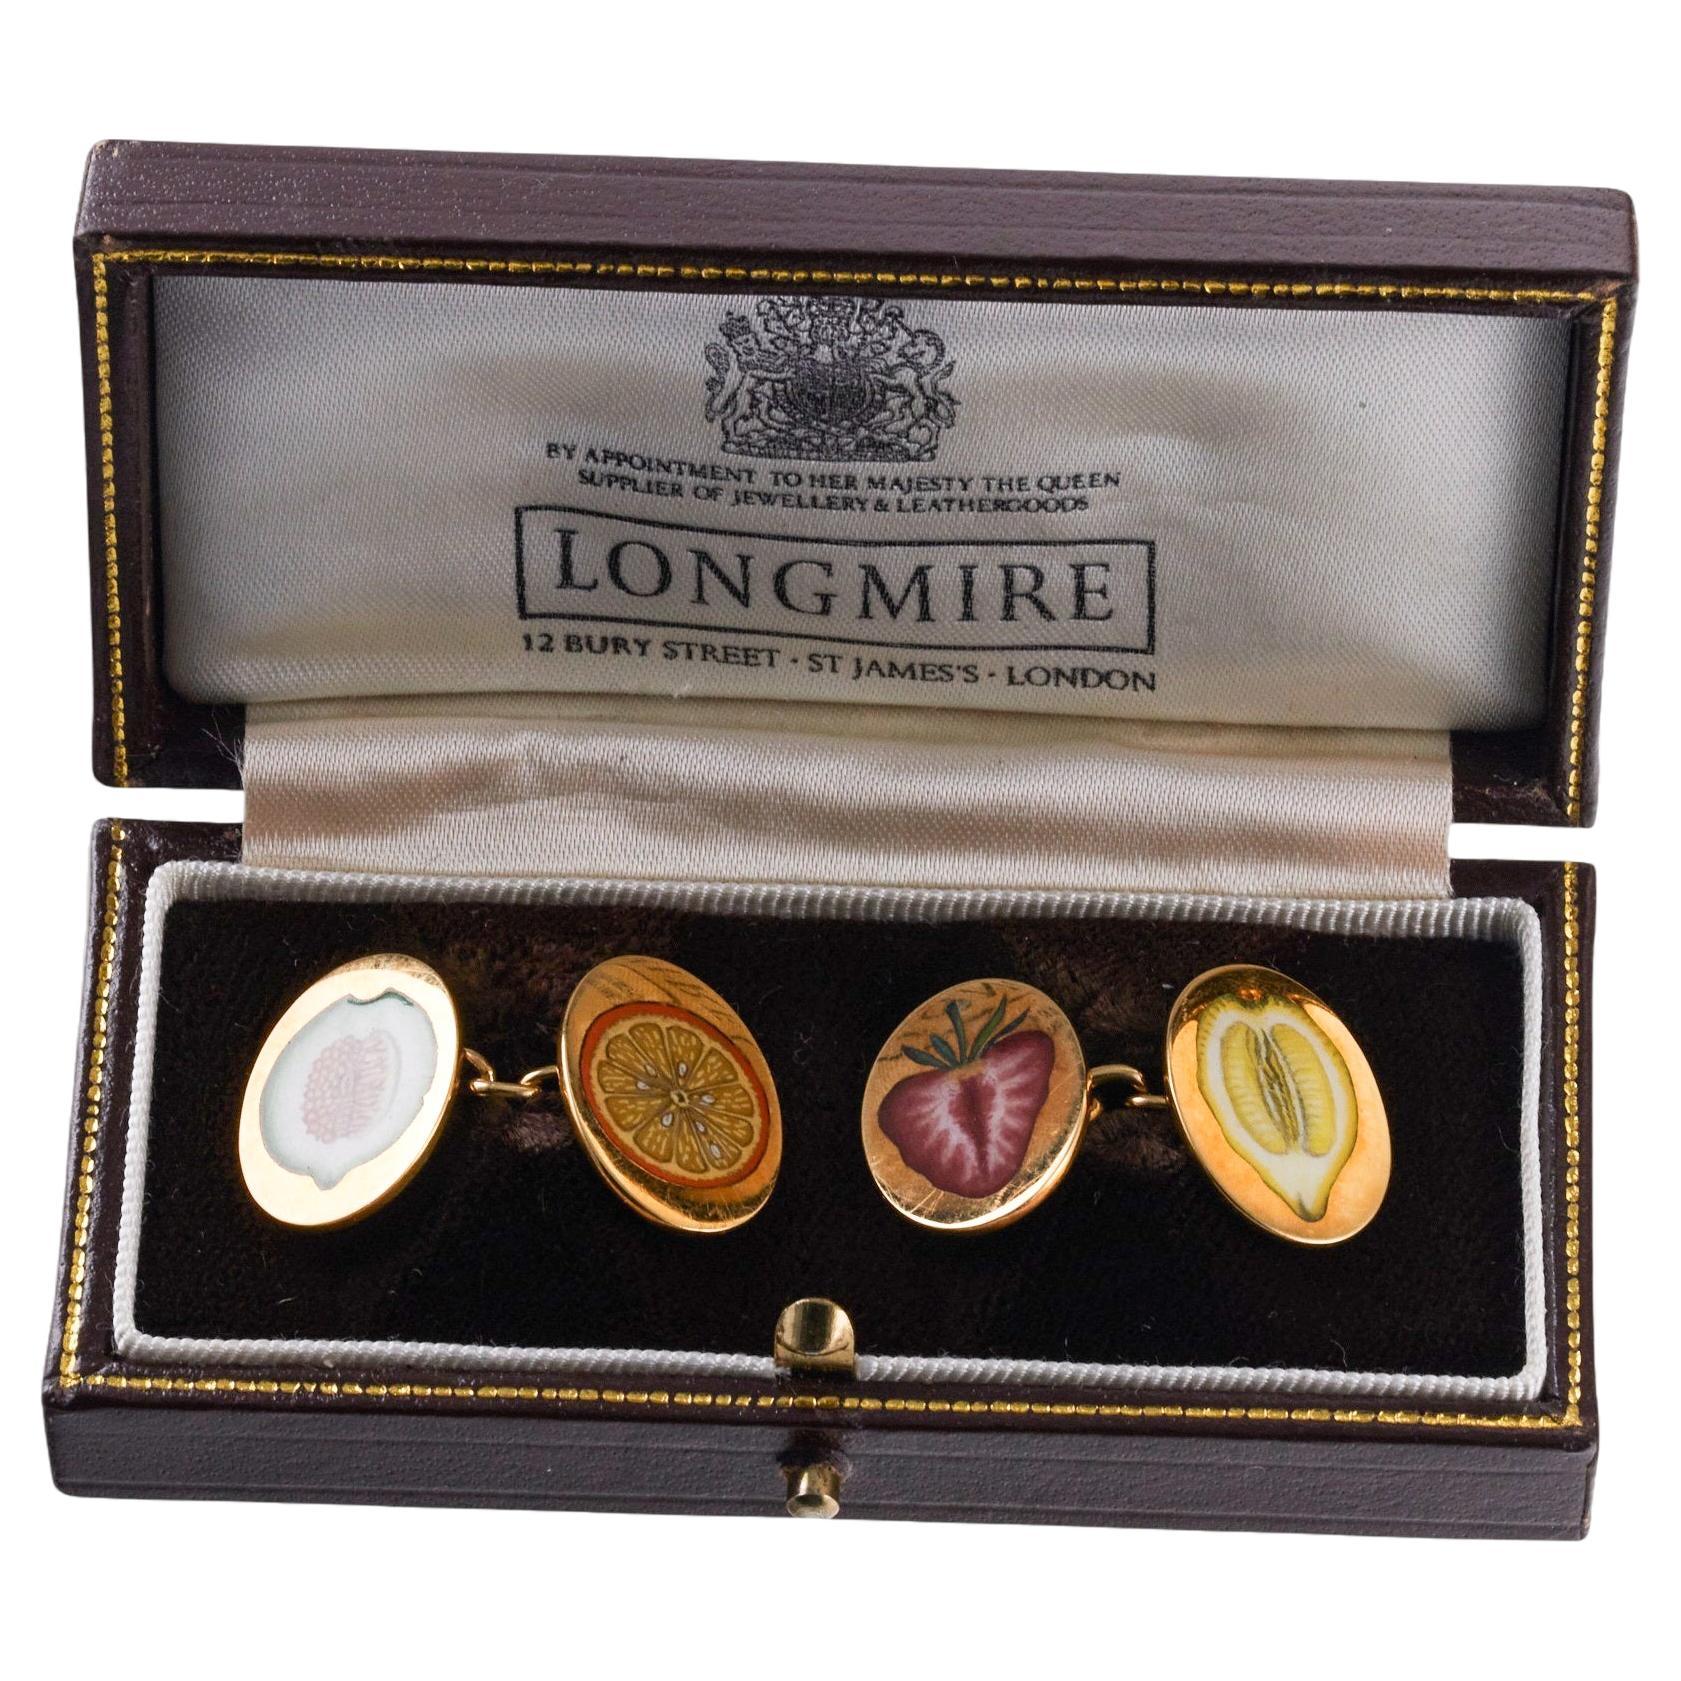 Pair of 18k gold oval cufflinks, crafted by Longmire of London, adorned with enamel fruits - lemon, melon, strawberry and orange, cut in half. Each top is 19mm x 15mm. Come in original fitted box. Hallmarked Longmire, PL, English gold marks. Weight